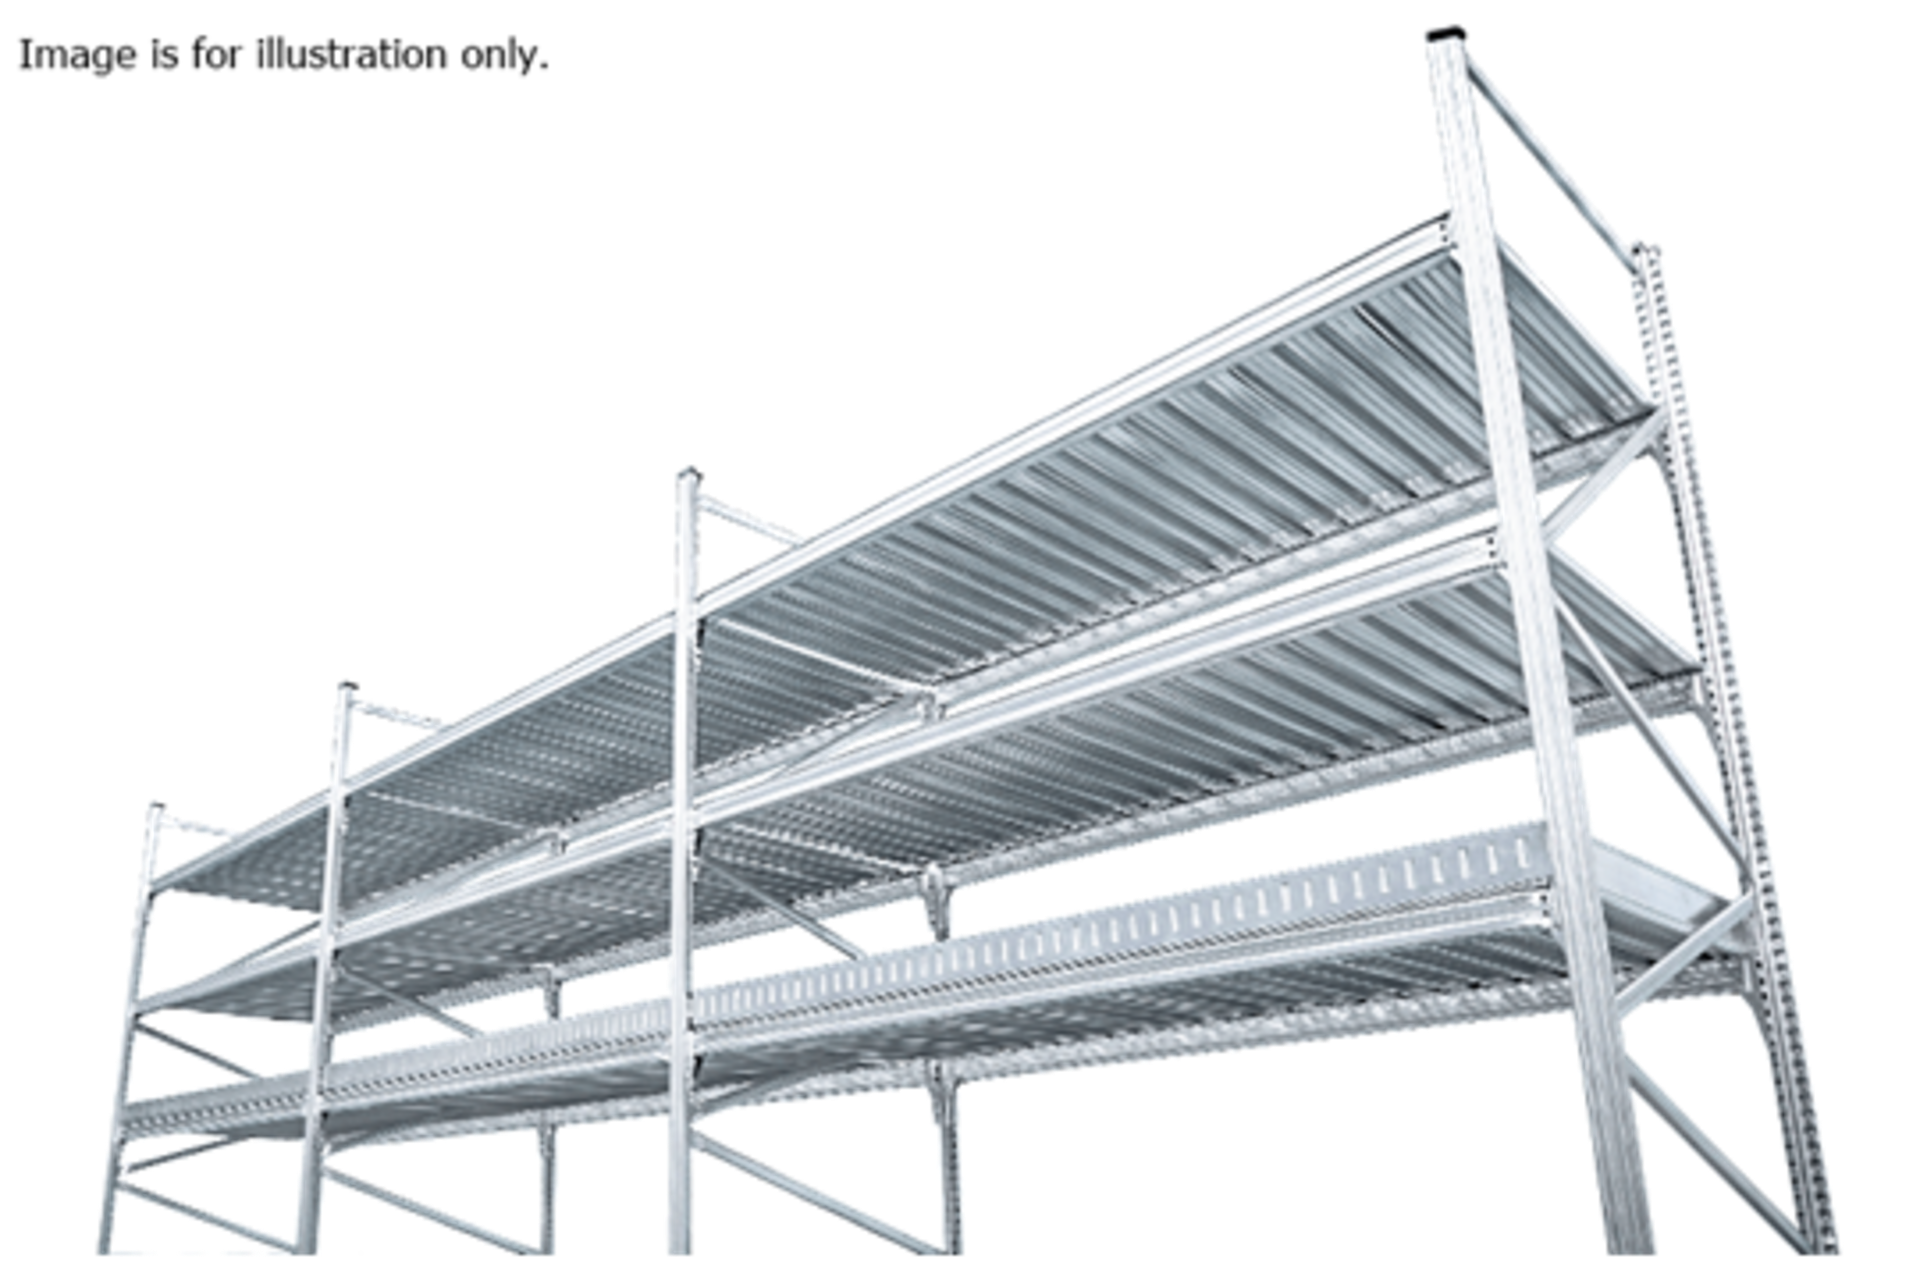 4 x Bays of Metalsistem Steel Modular Storage Shelving - Includes 29 Pieces - Recently Removed